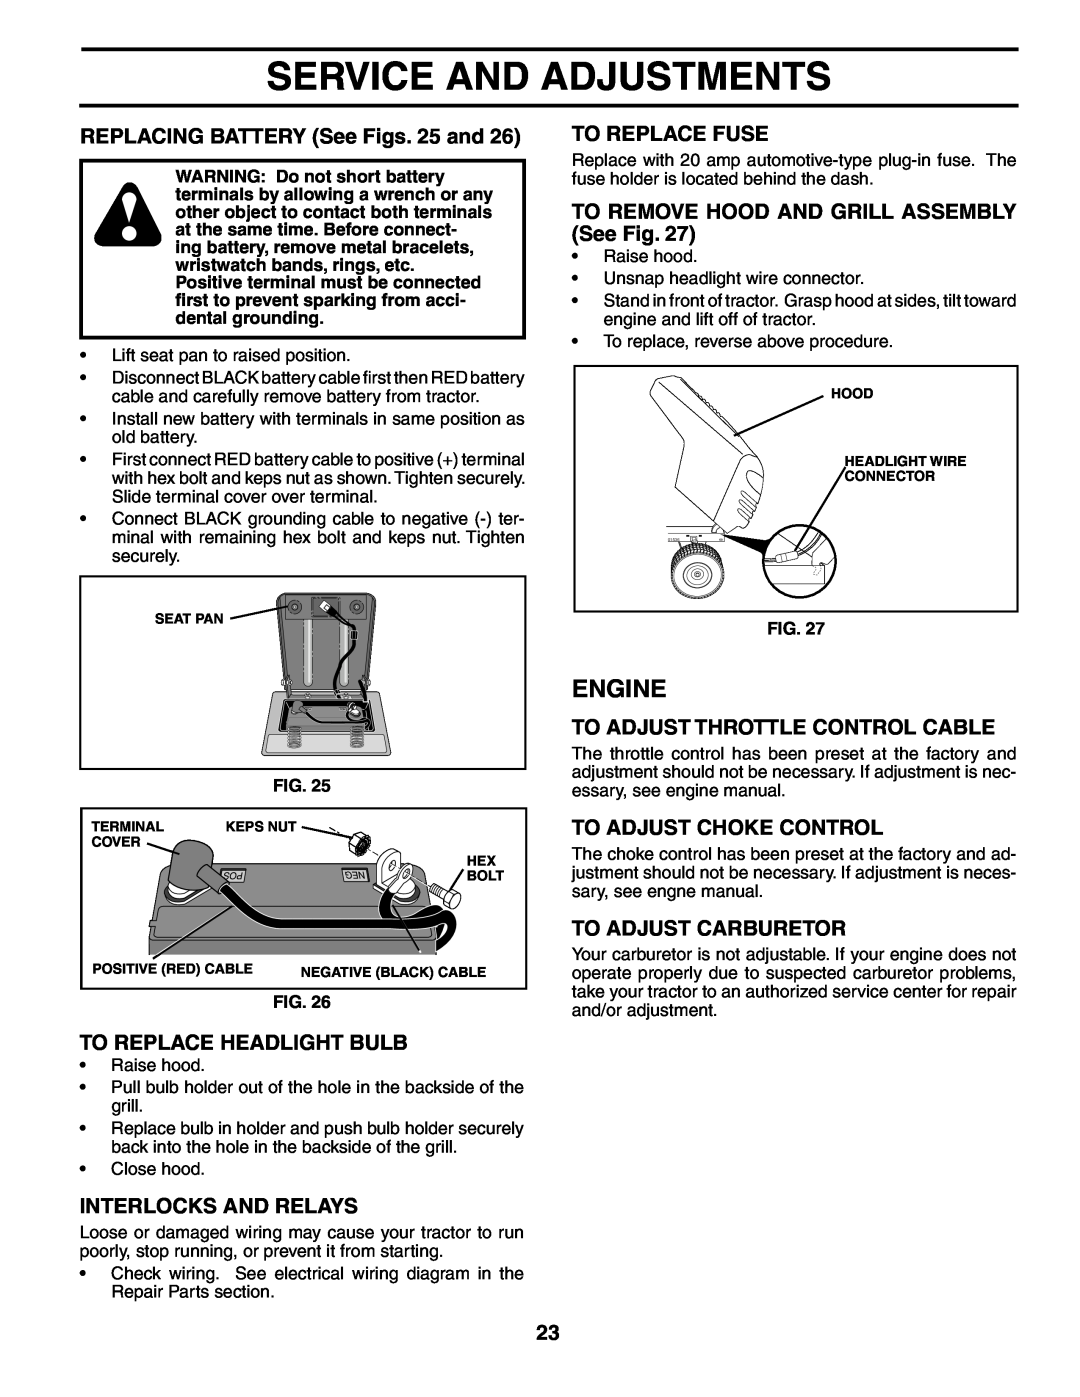 Poulan 401115 manual REPLACING BATTERY See Figs. 25 and, To Replace Headlight Bulb, Interlocks And Relays, To Replace Fuse 